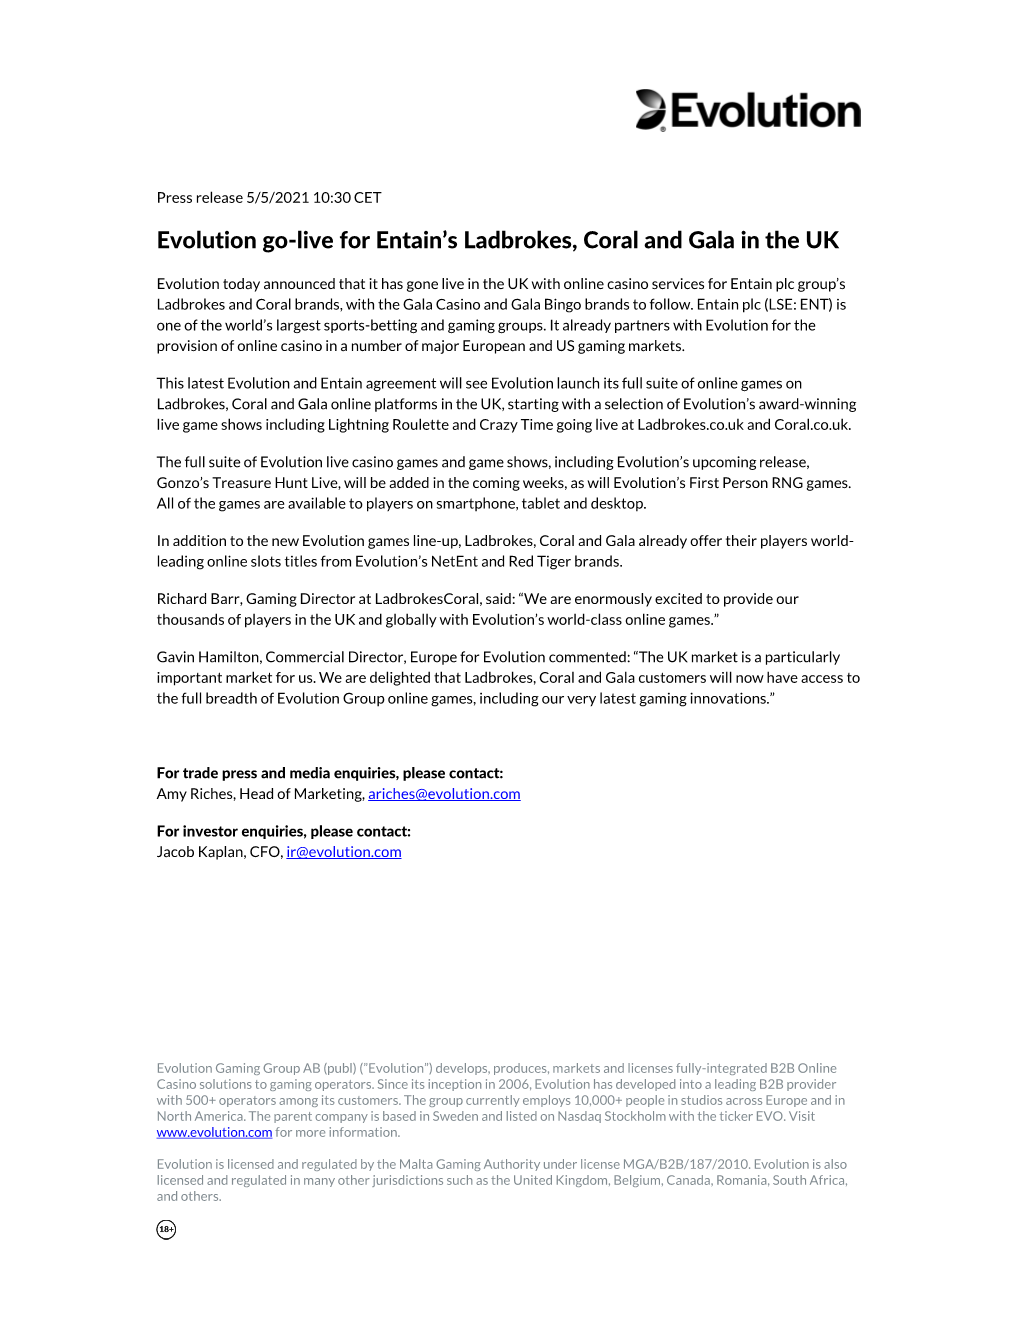 Evolution Go-Live for Entain's Ladbrokes, Coral and Gala in the UK